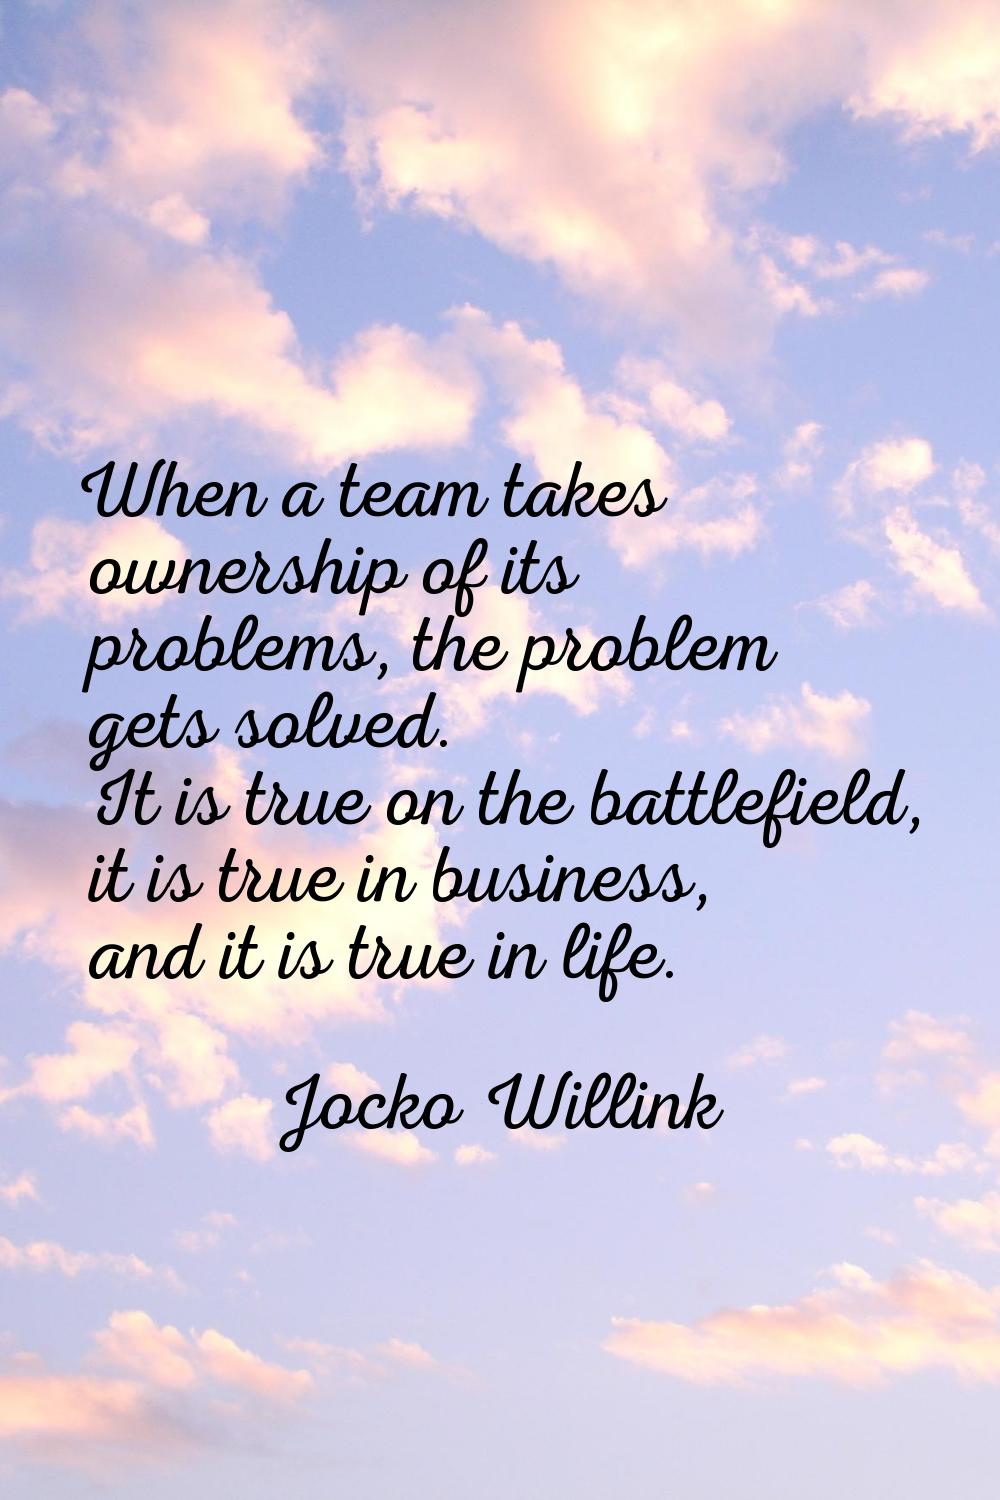 When a team takes ownership of its problems, the problem gets solved. It is true on the battlefield